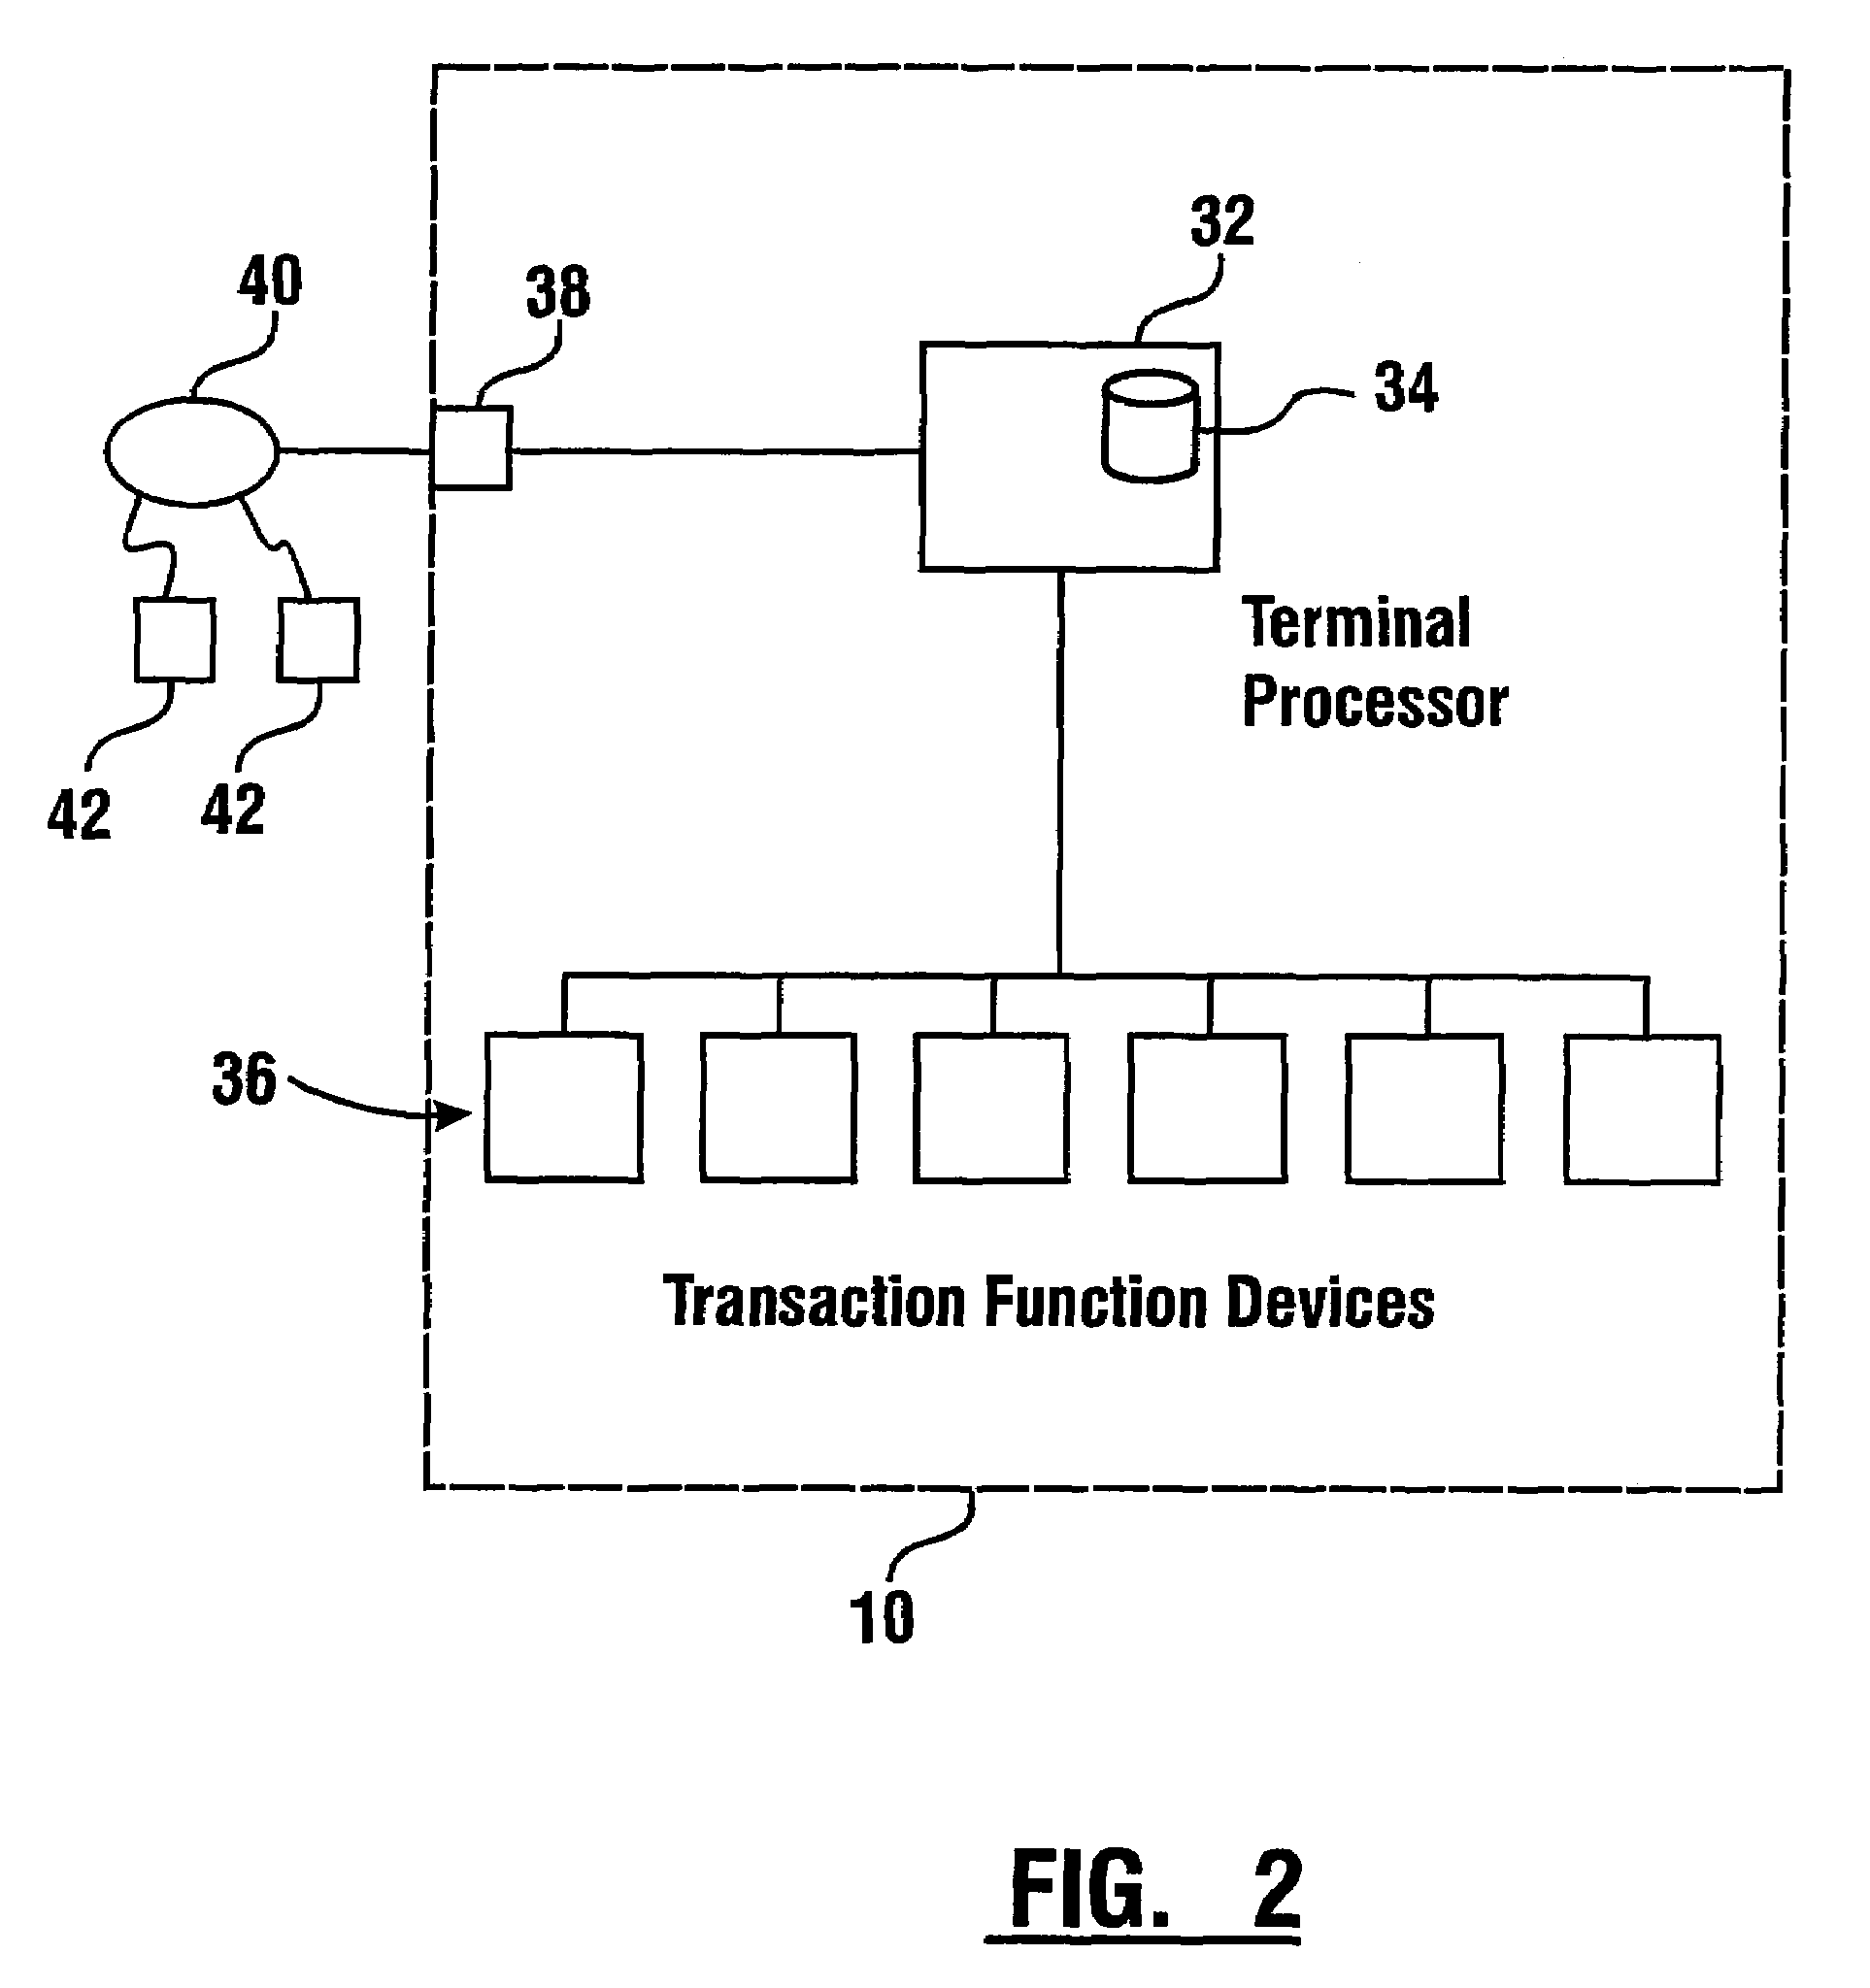 Method and system of evaluating checks deposited into a cash dispensing automated banking machine